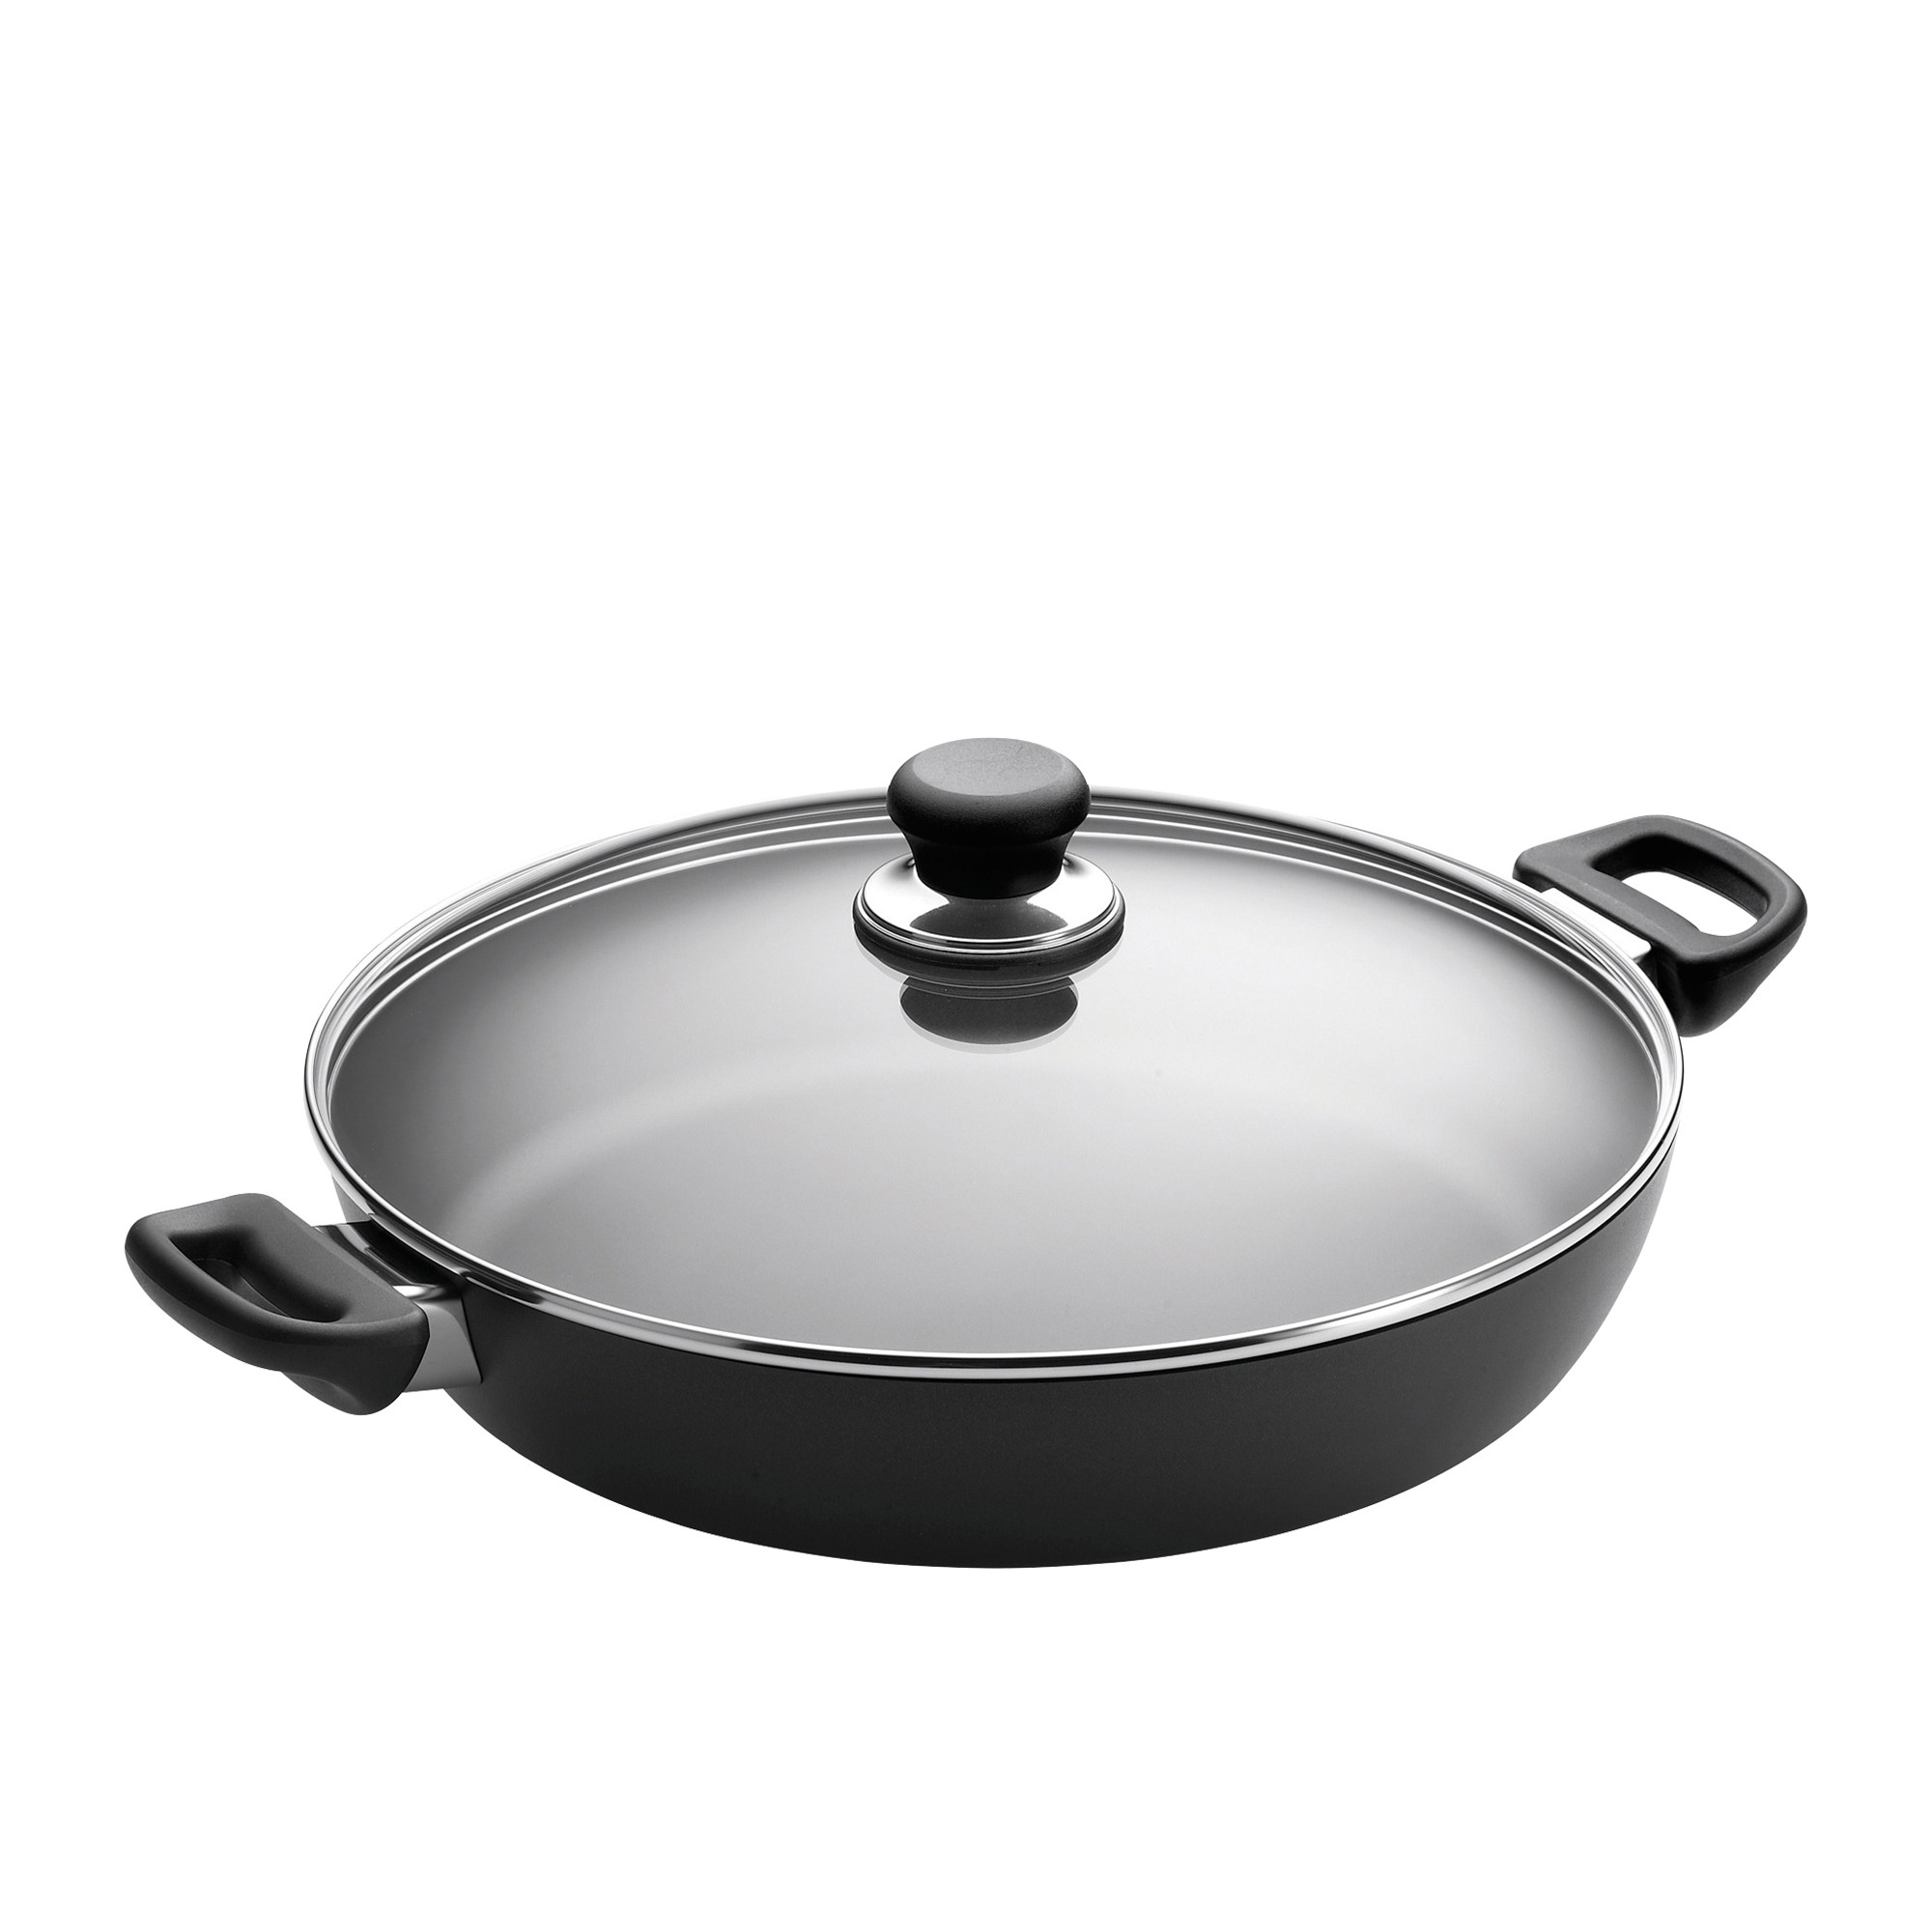 Scanpan Classic Covered Chef's Pan 32cm Image 1